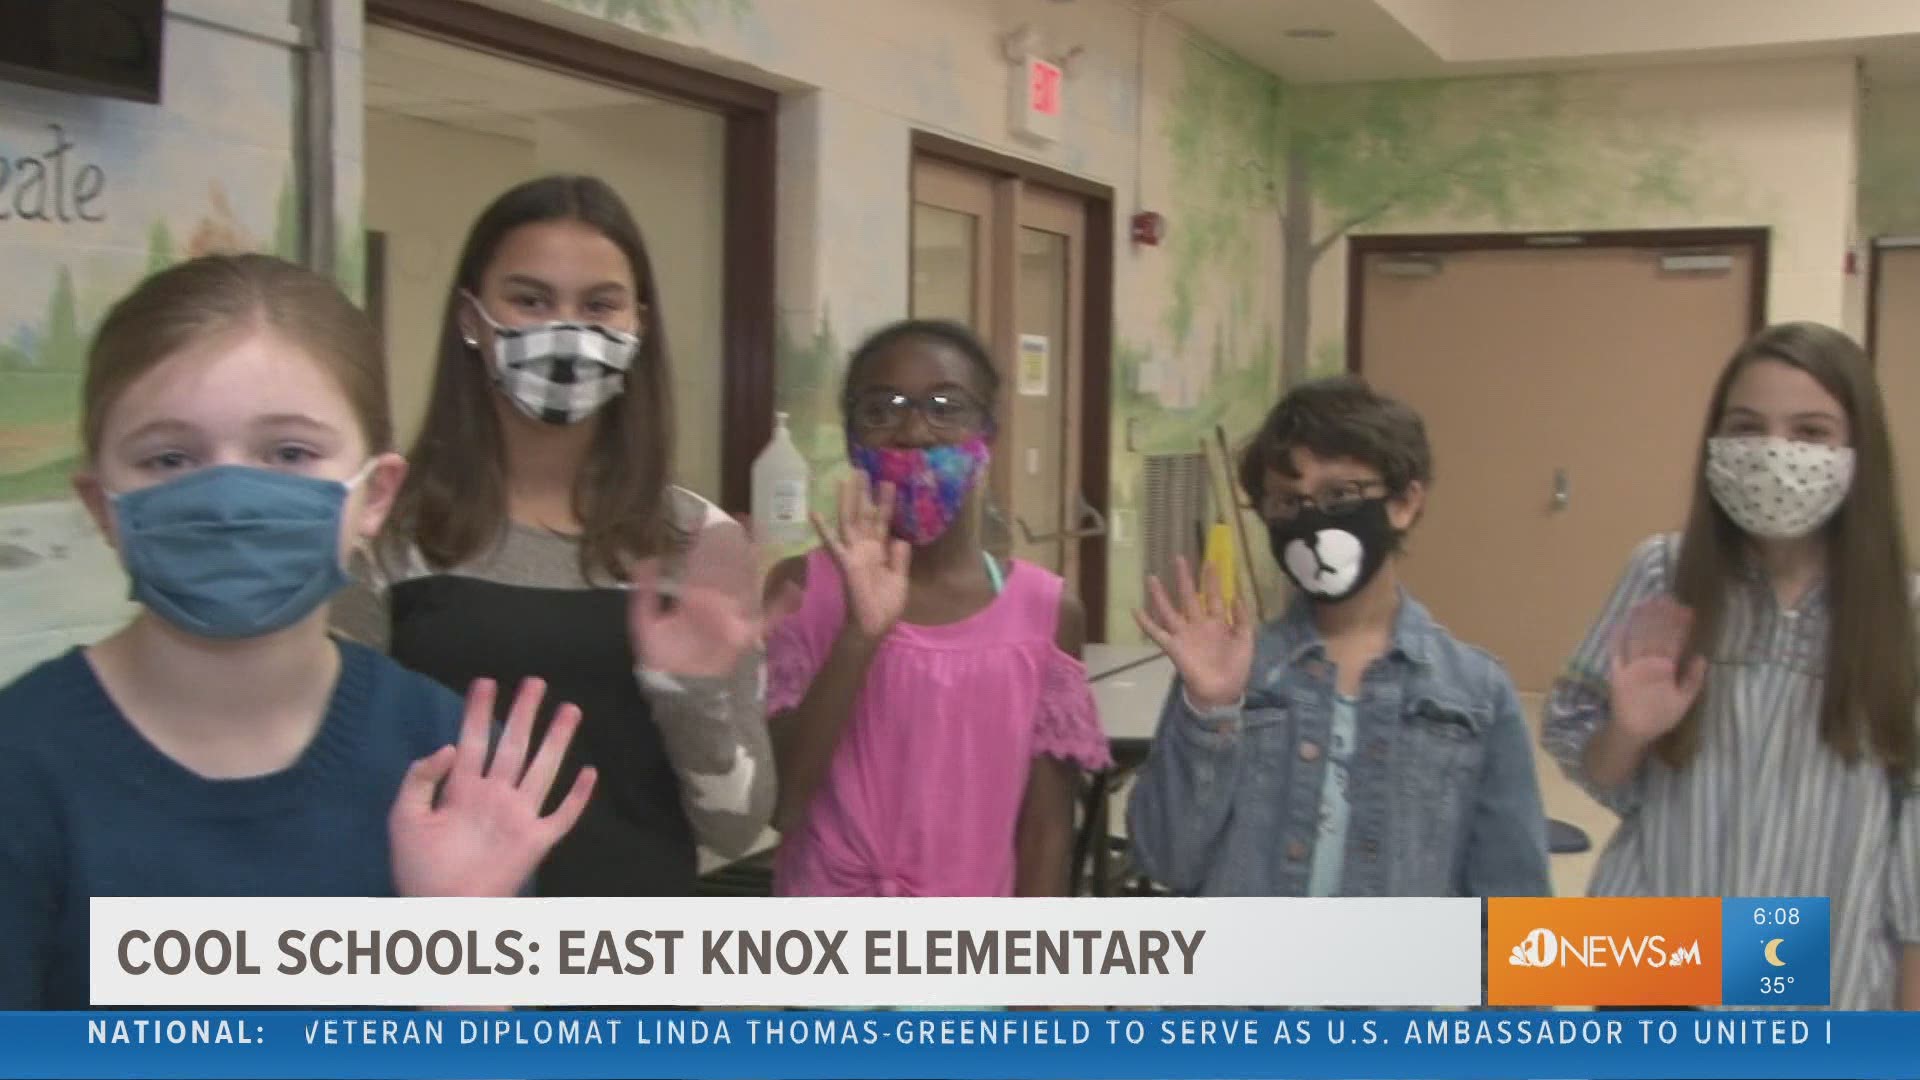 10news meteorologist Rebecca Sweet talks with East Knox Elementary's kindness crew.